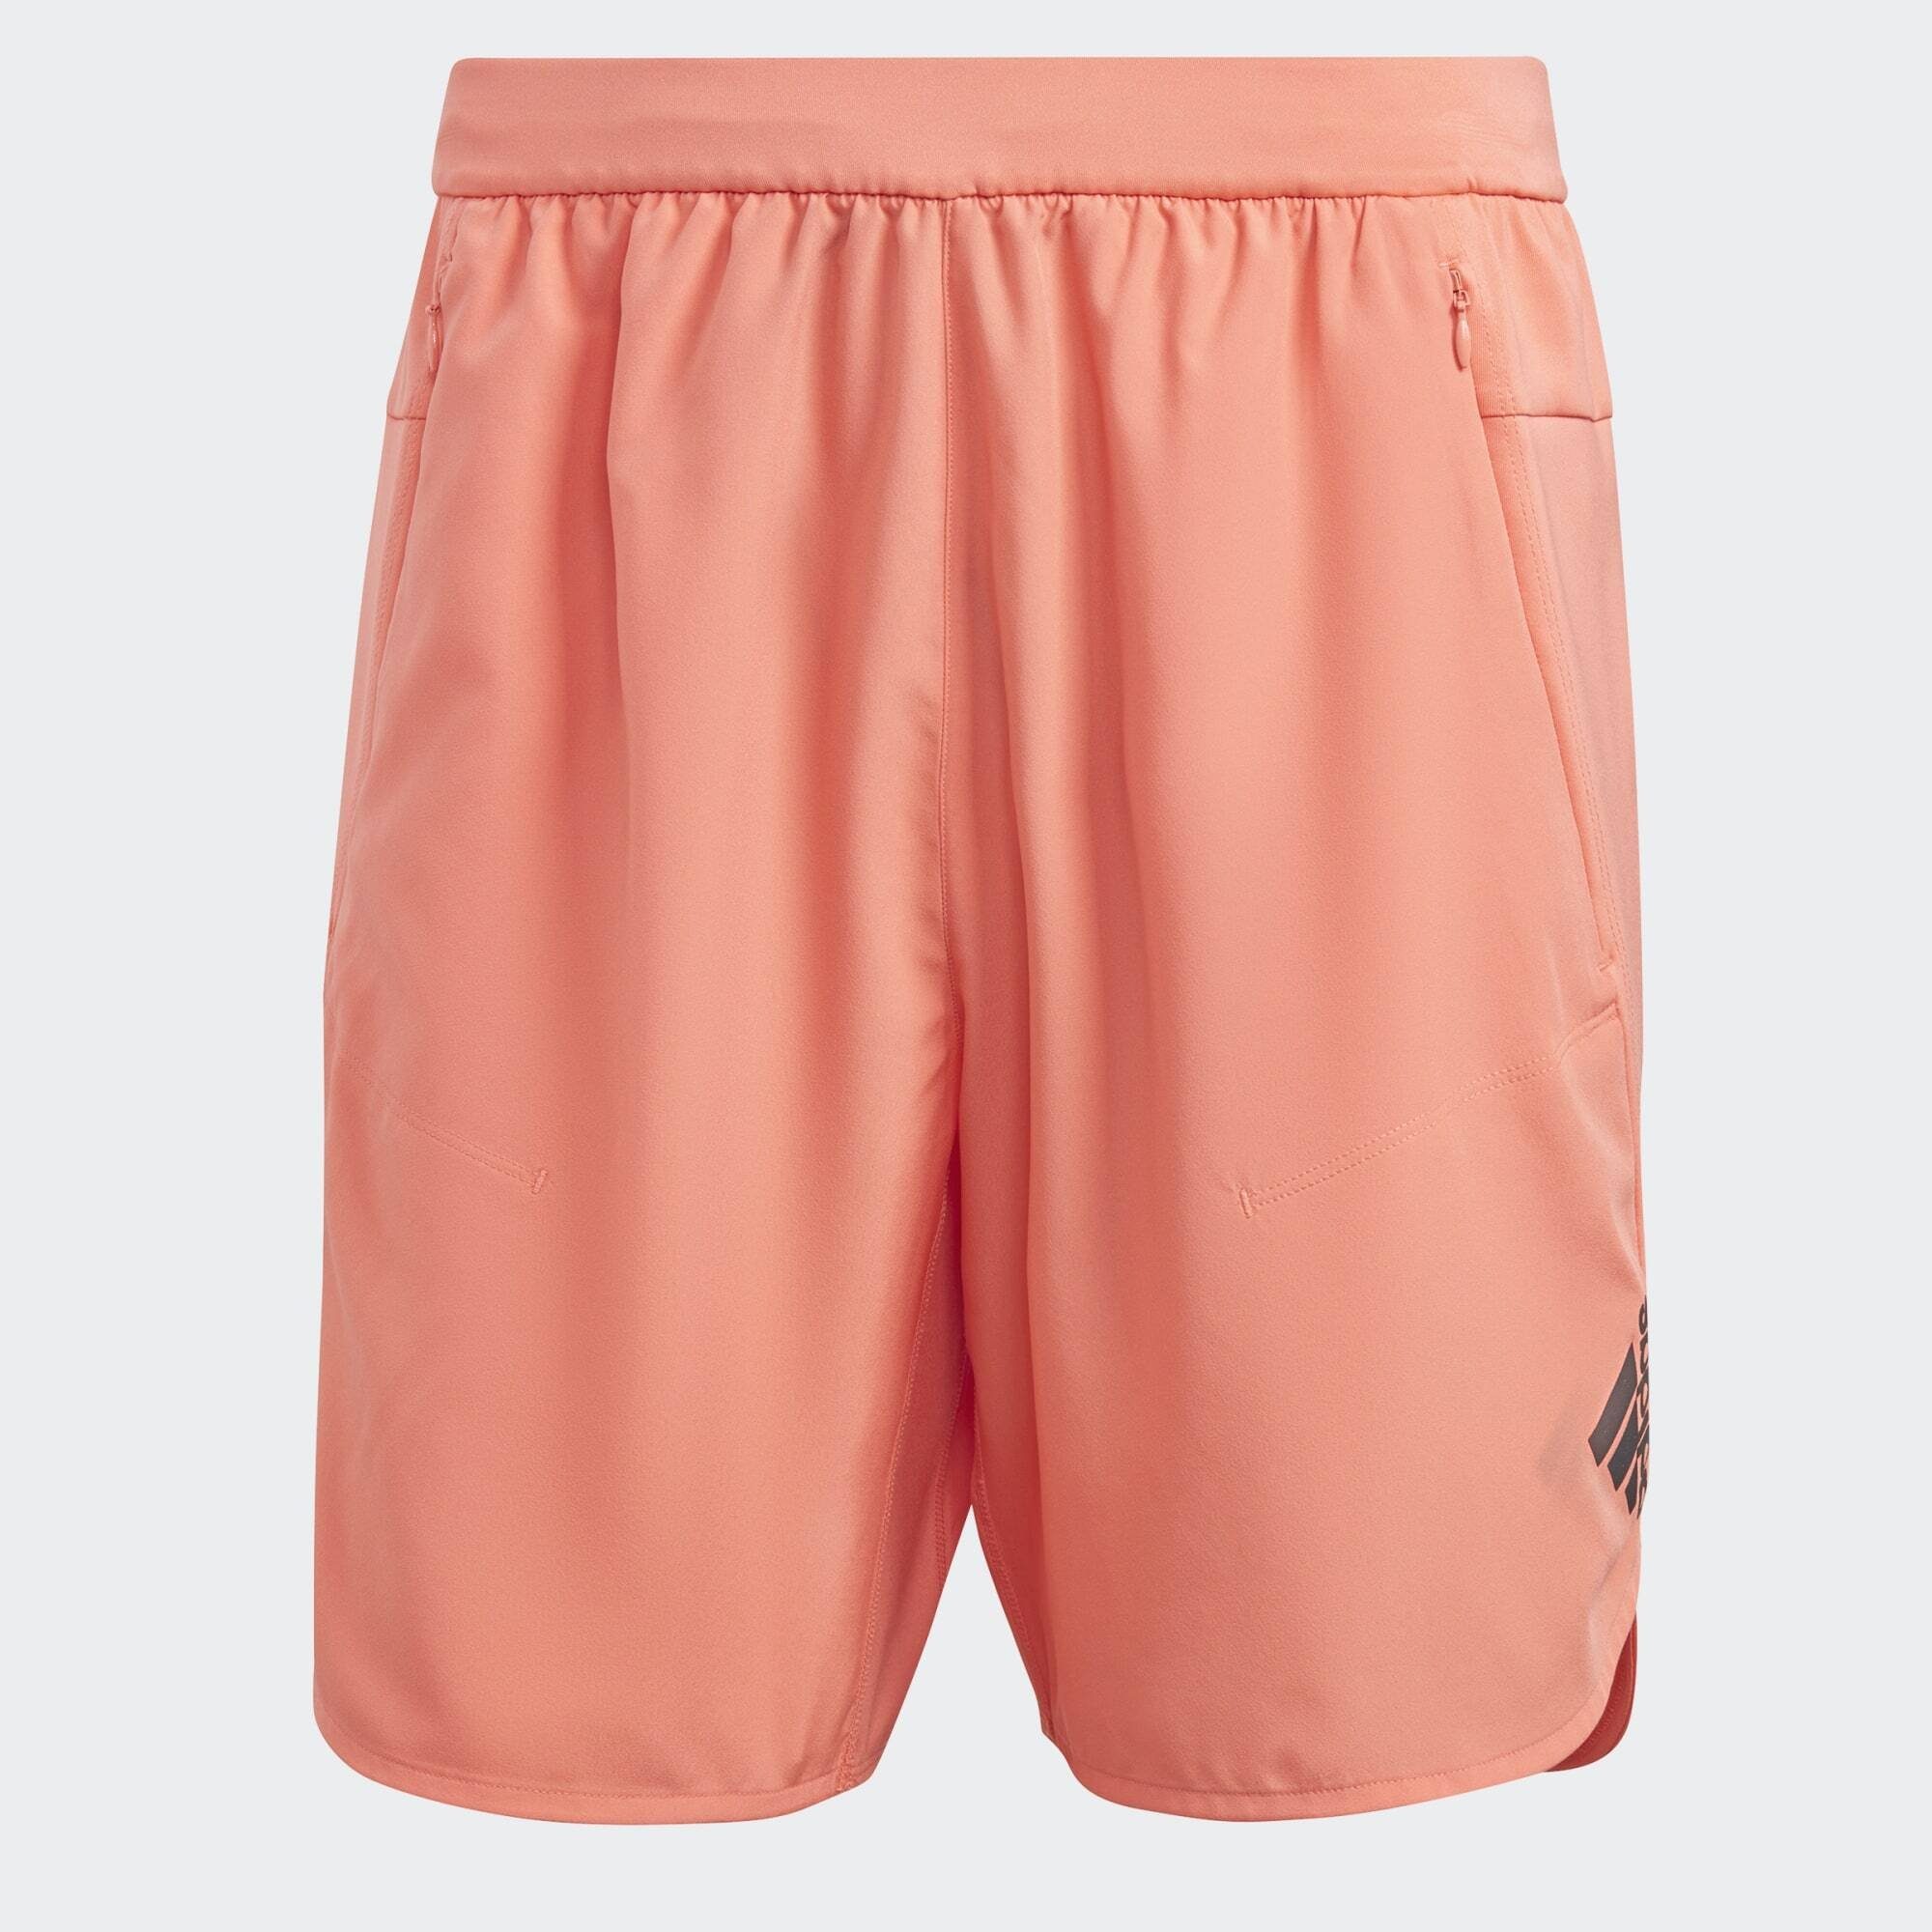 Performance SHORTS Fusion Coral TRAINING Funktionsshorts FOR adidas DESIGNED